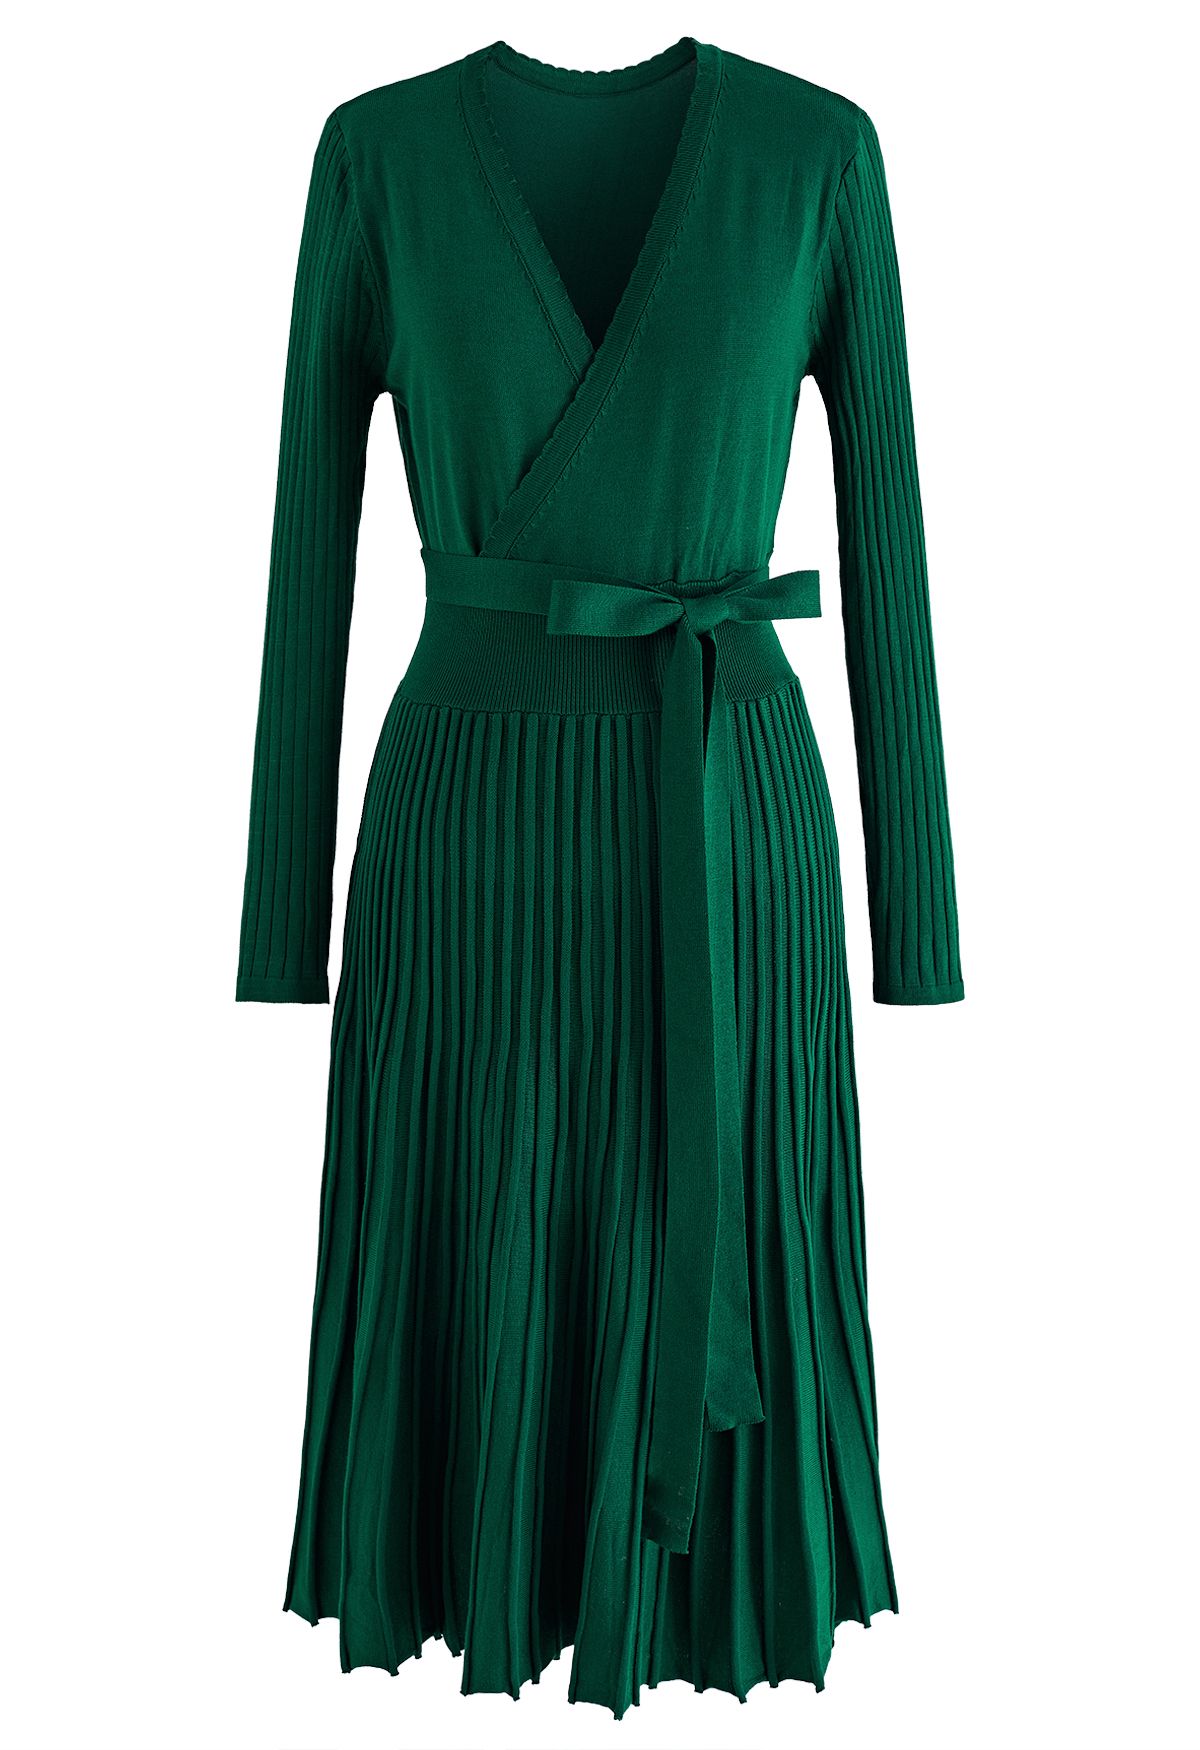 Embrace a Lithe Knitted Dress in Emerald - Retro, Indie and Unique Fashion